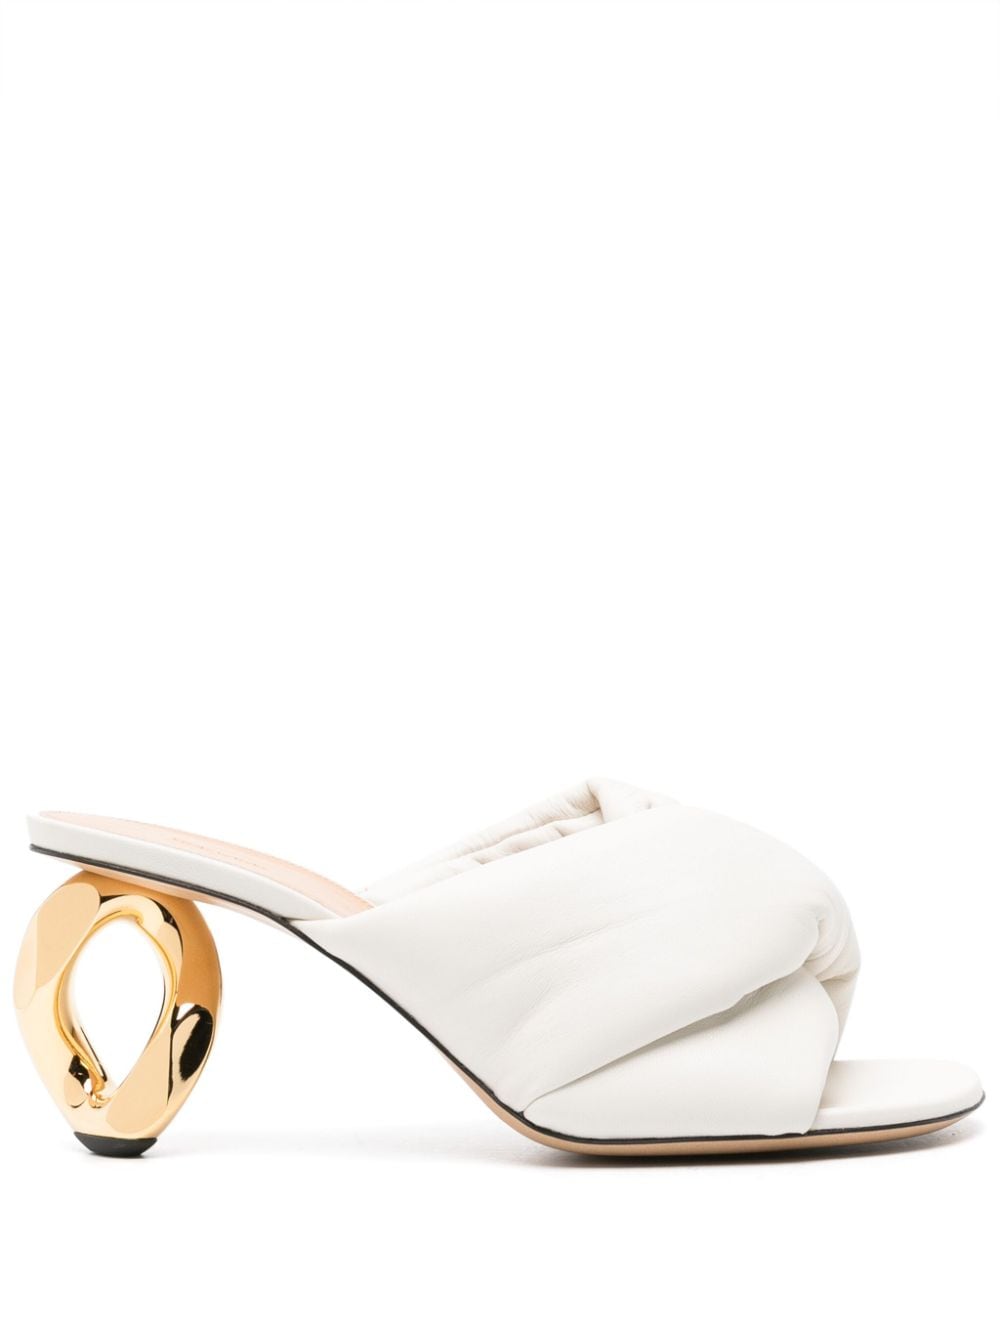 JW Anderson Chain Heel 95mm leather mules - Neutrals